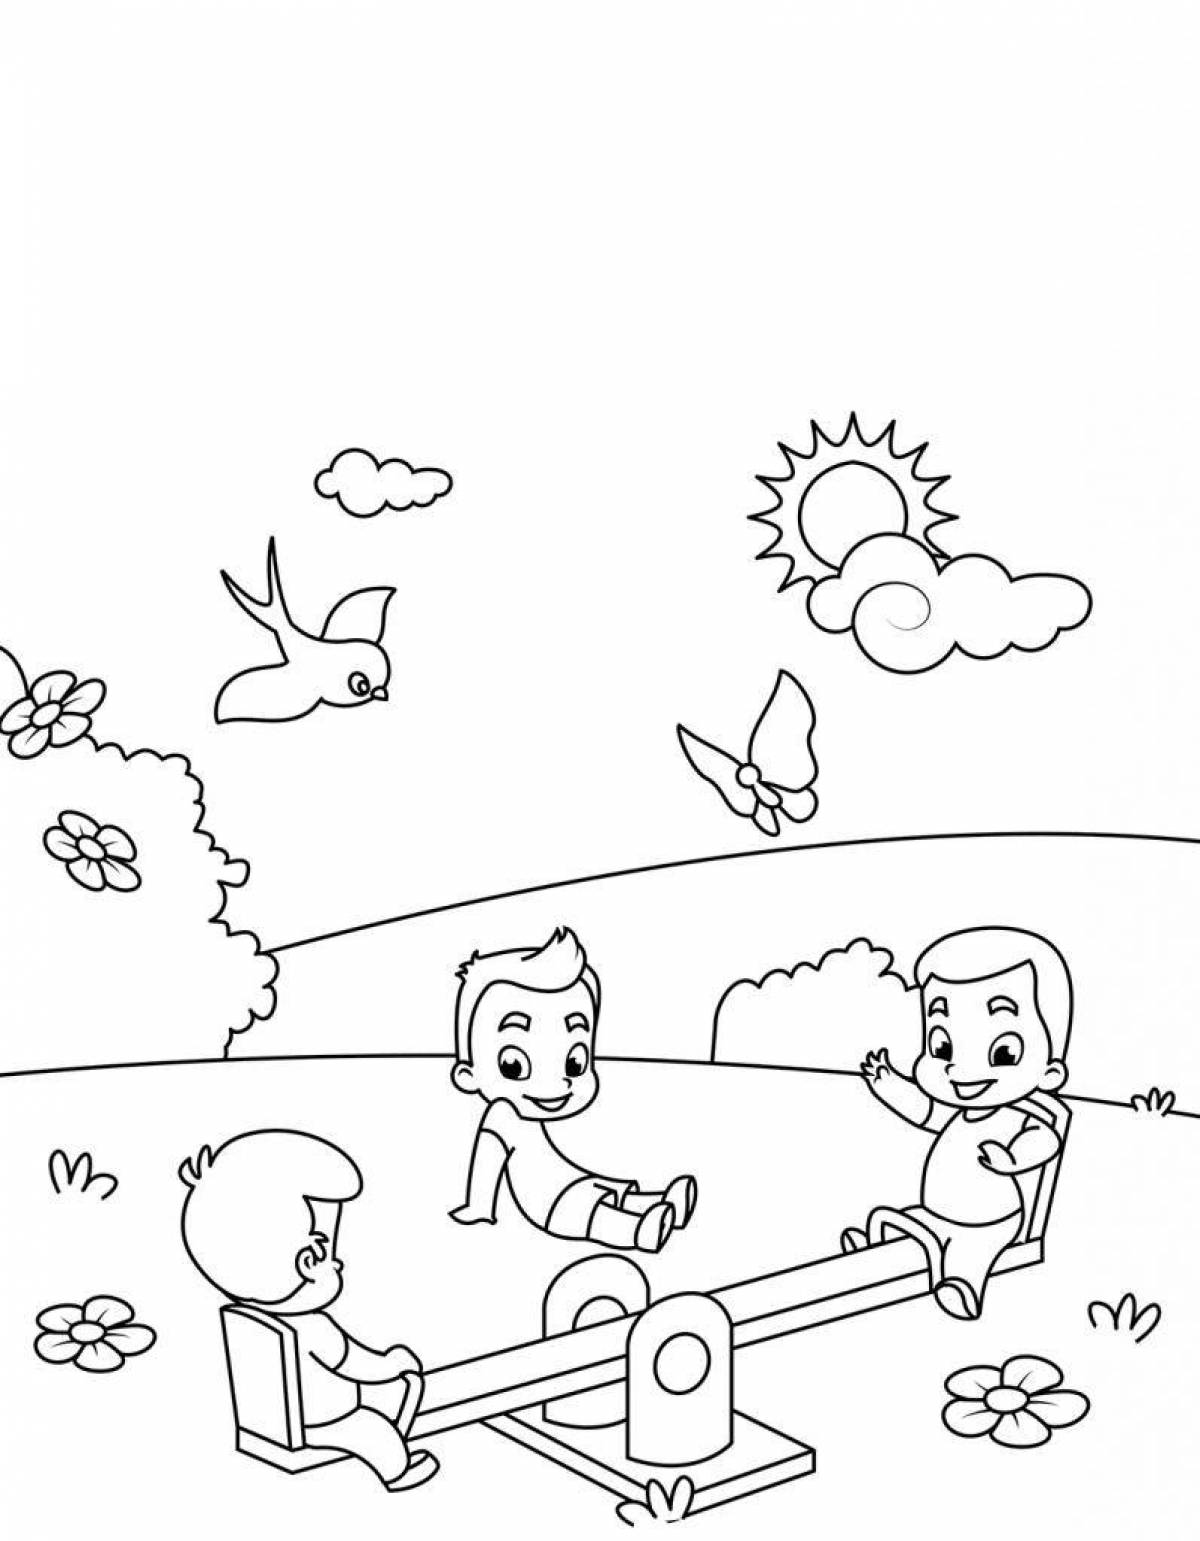 Bright walk coloring book for kids